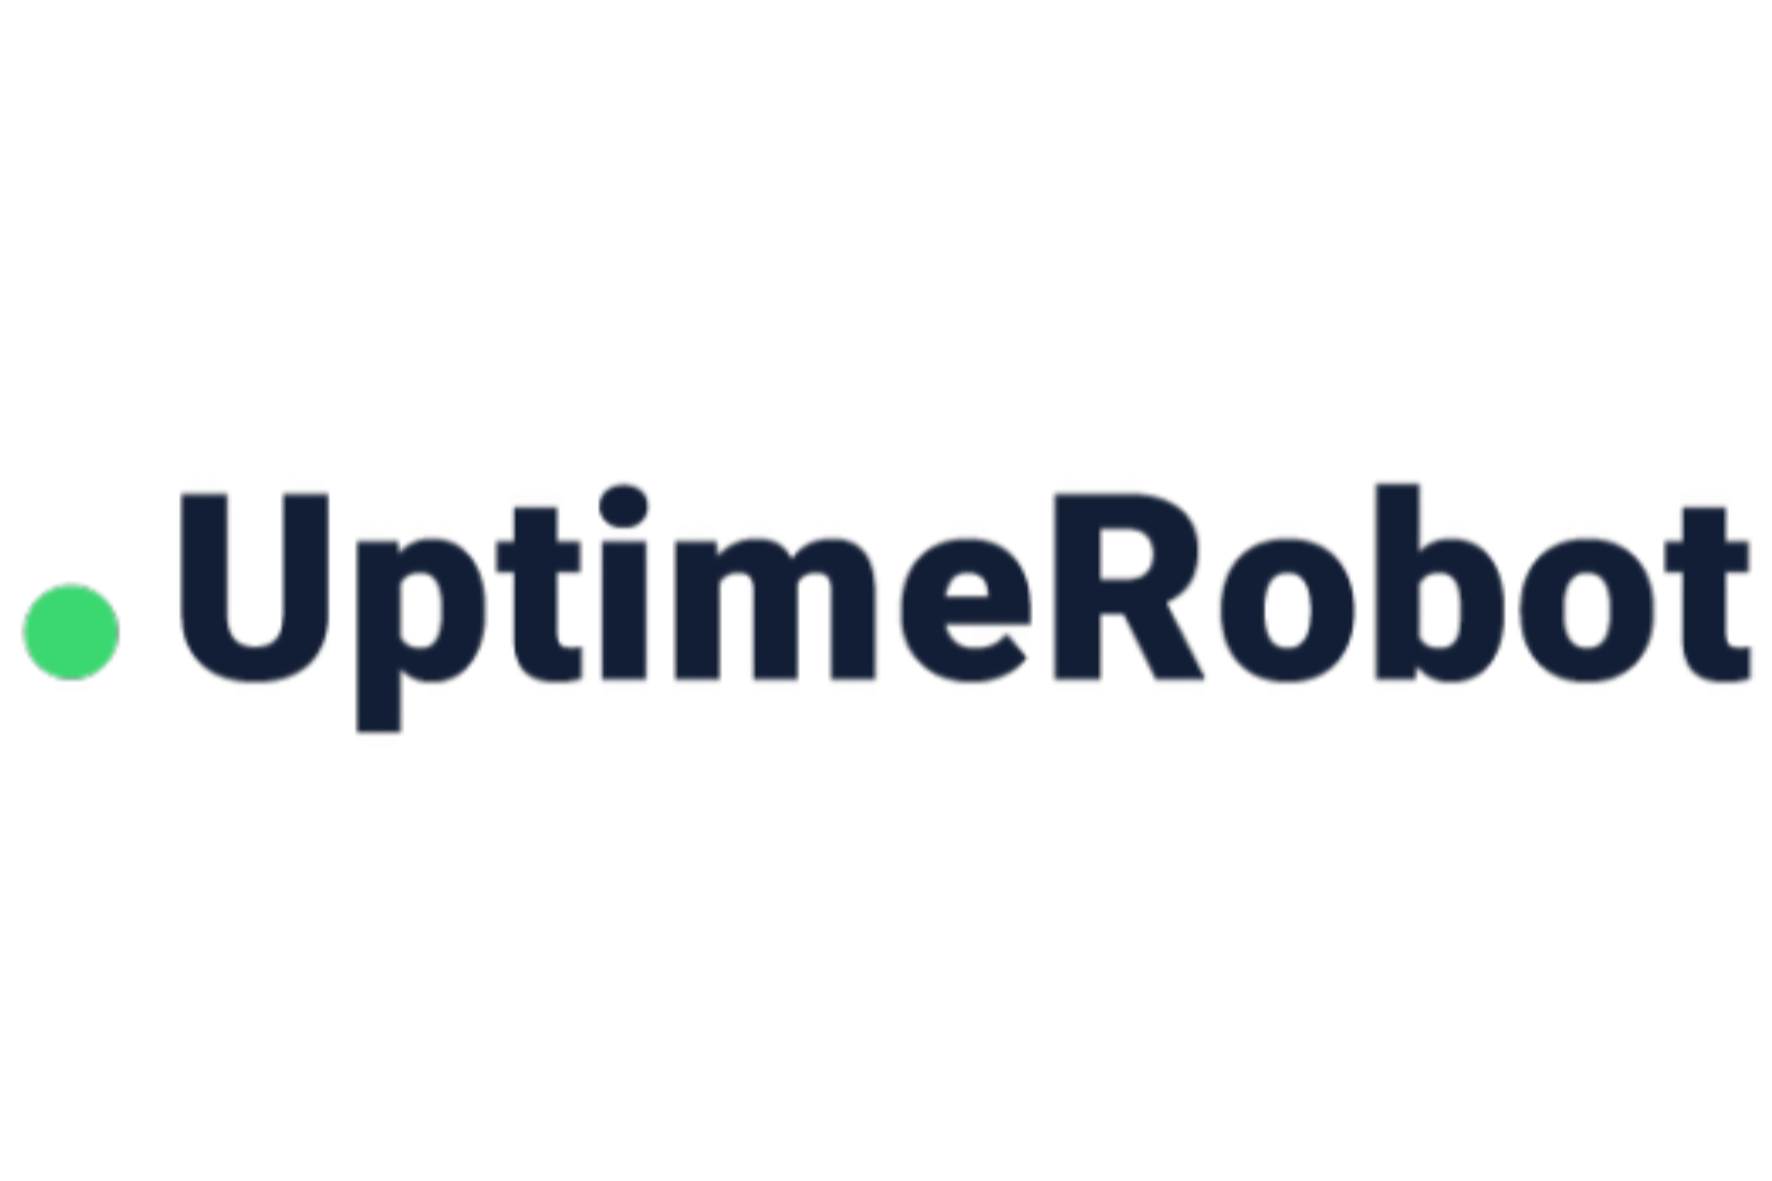 Visit Our Status Page Sponsored By UptimeRobot